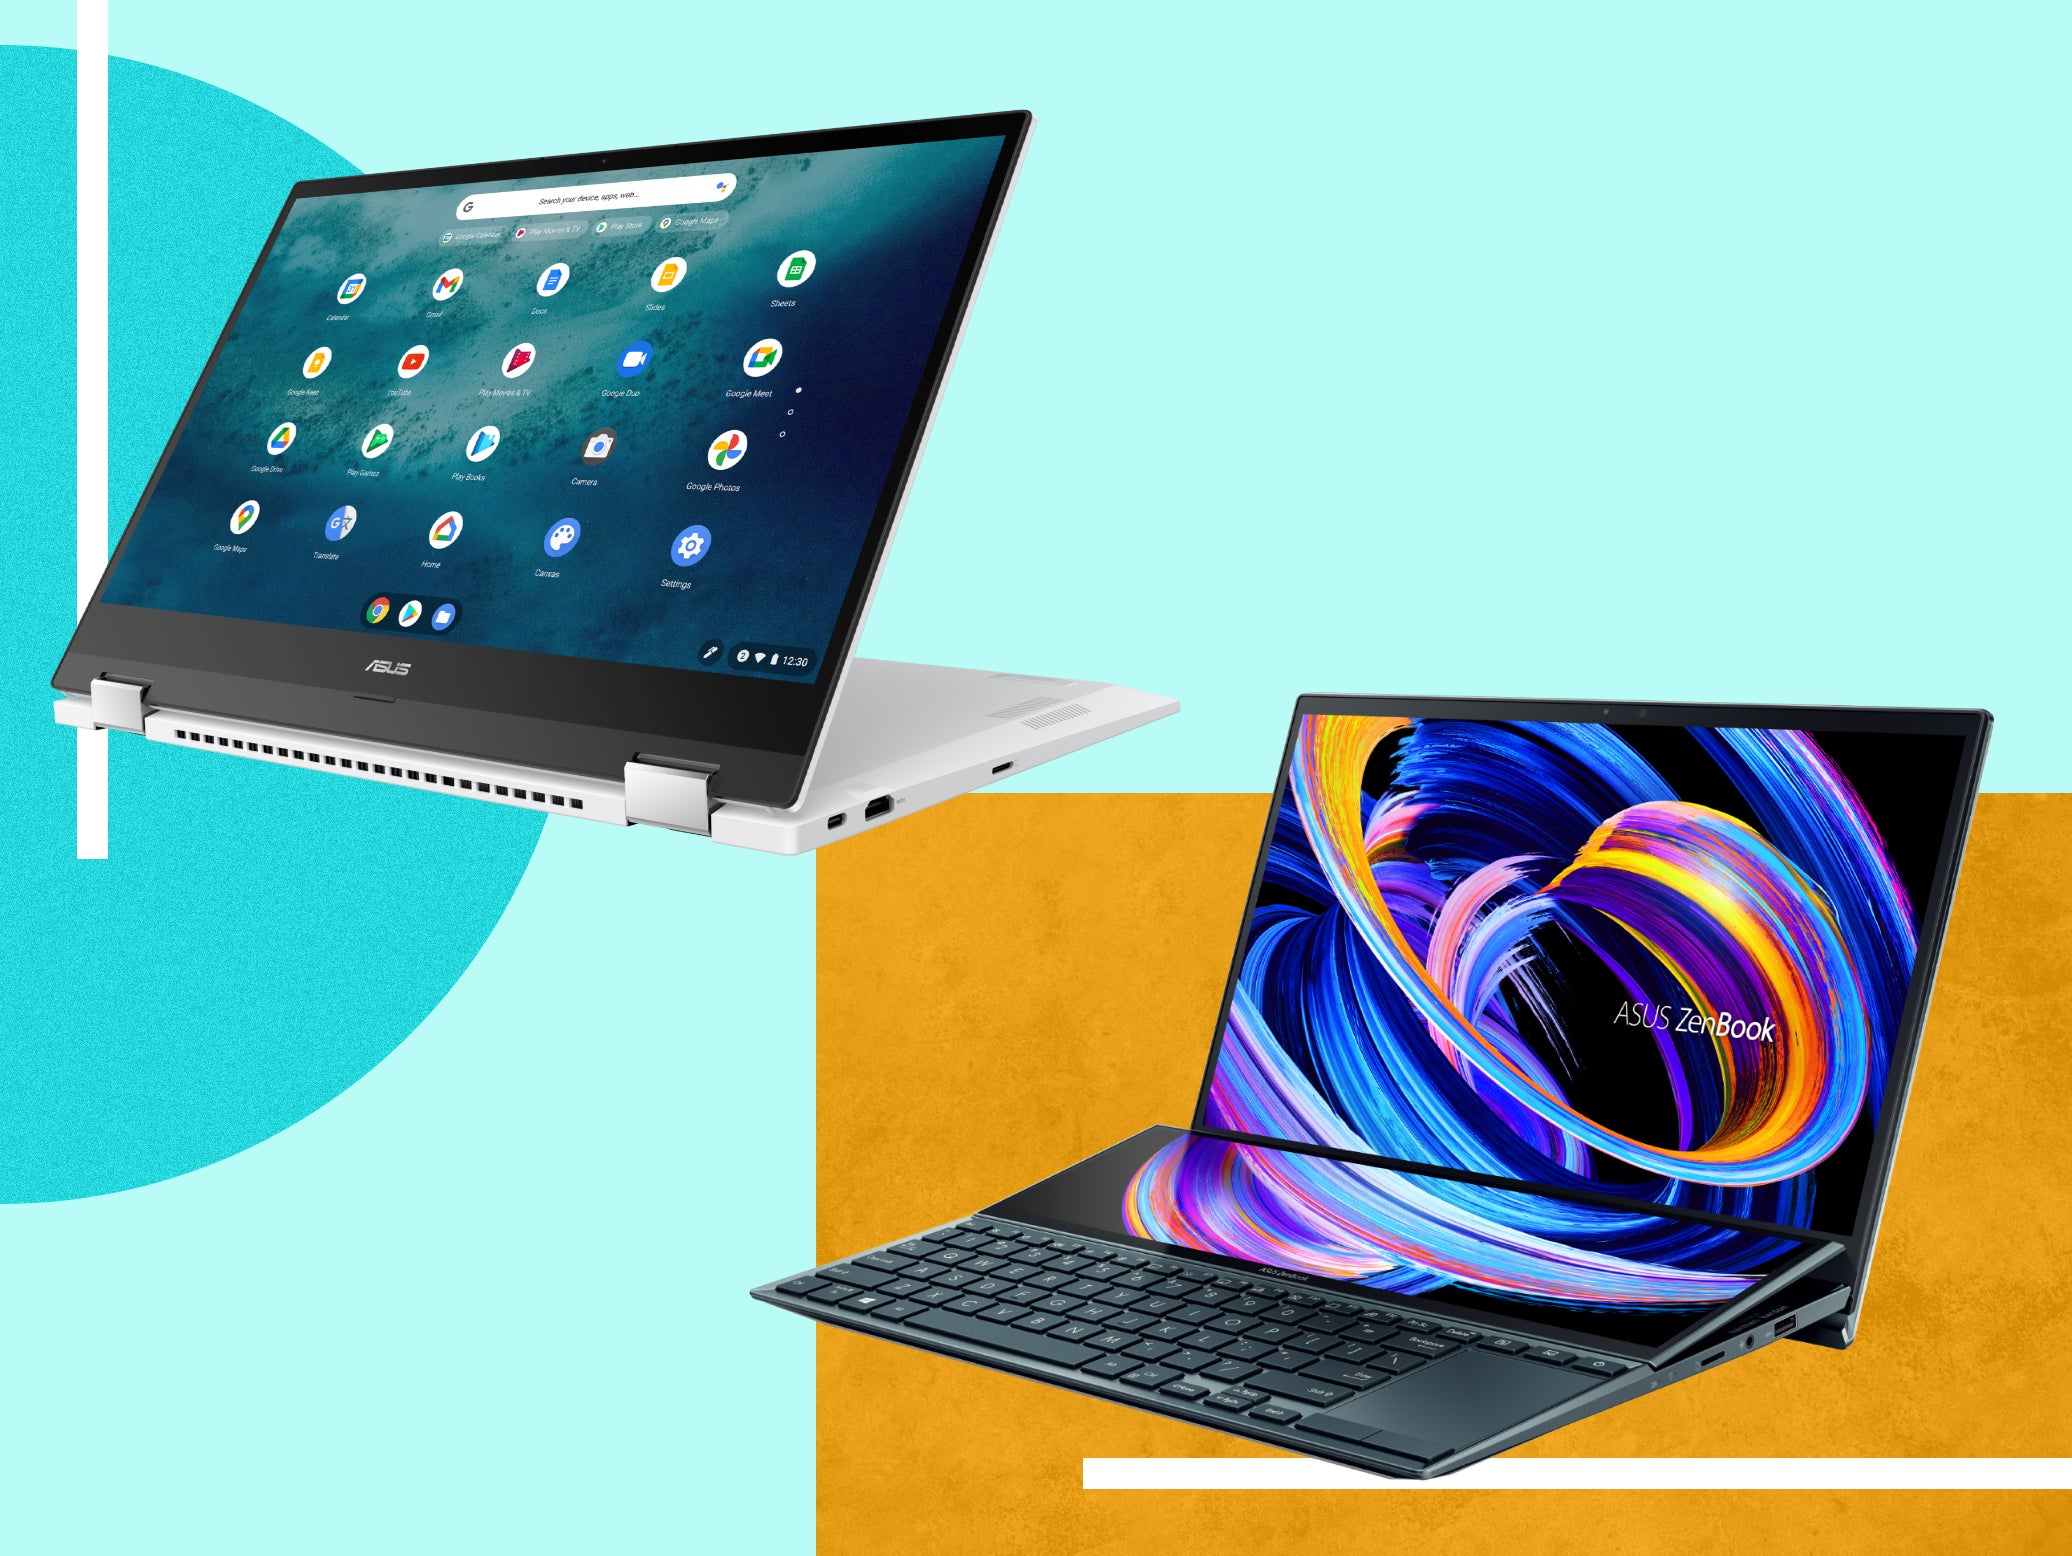 Best Asus laptop 2021: Vivobook, Zenbook and more tried and tested